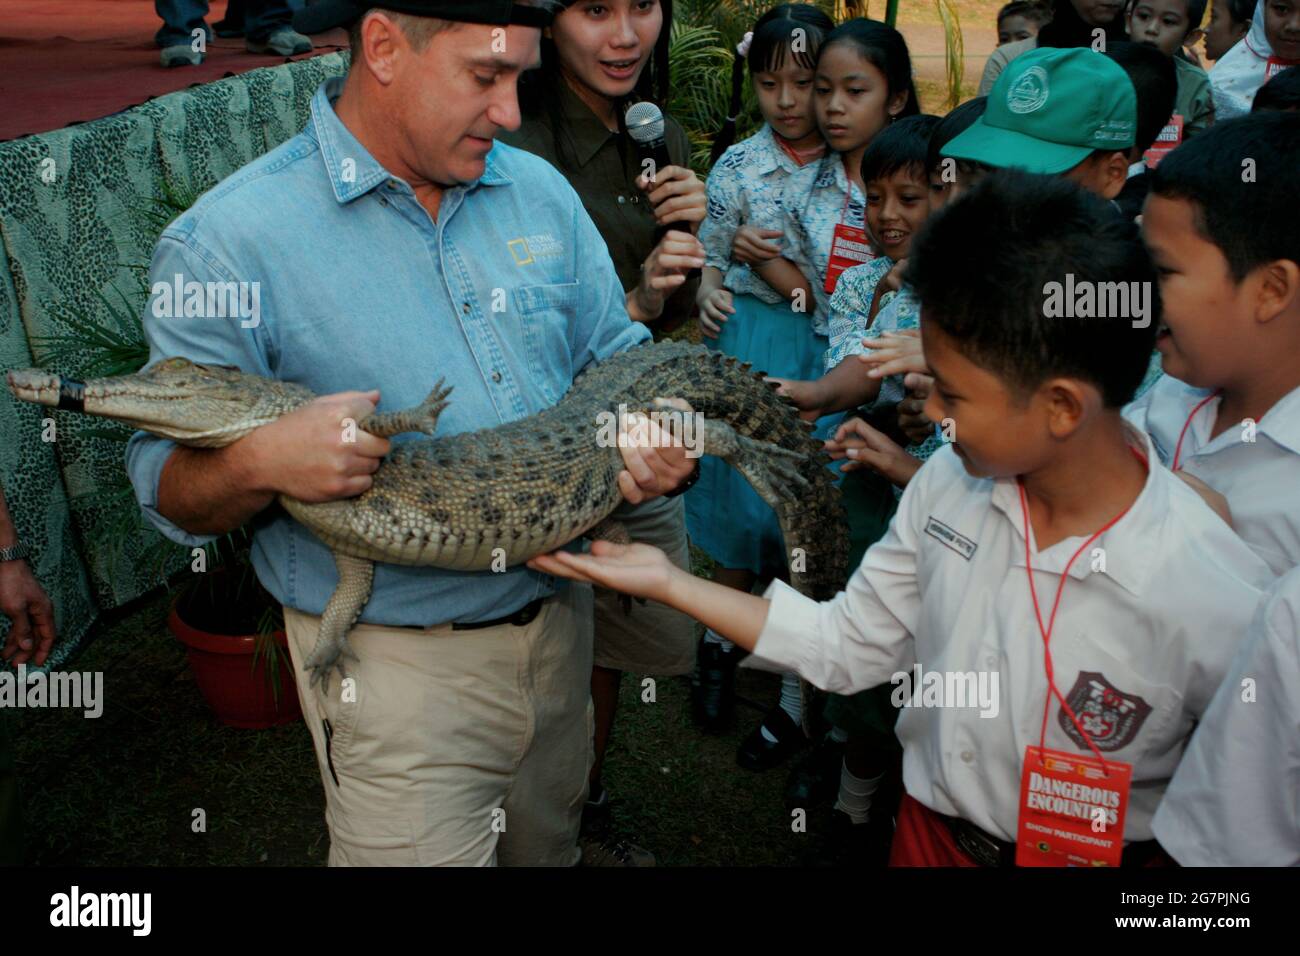 Bogor, West Java, Indonesia. 26th July 2006. Herpetologist Brady Barr is  holding a young crocodile to allow children to touch the reptile, during an  event to promote "Dangerous Encounters: Brady's Croc Adventure",